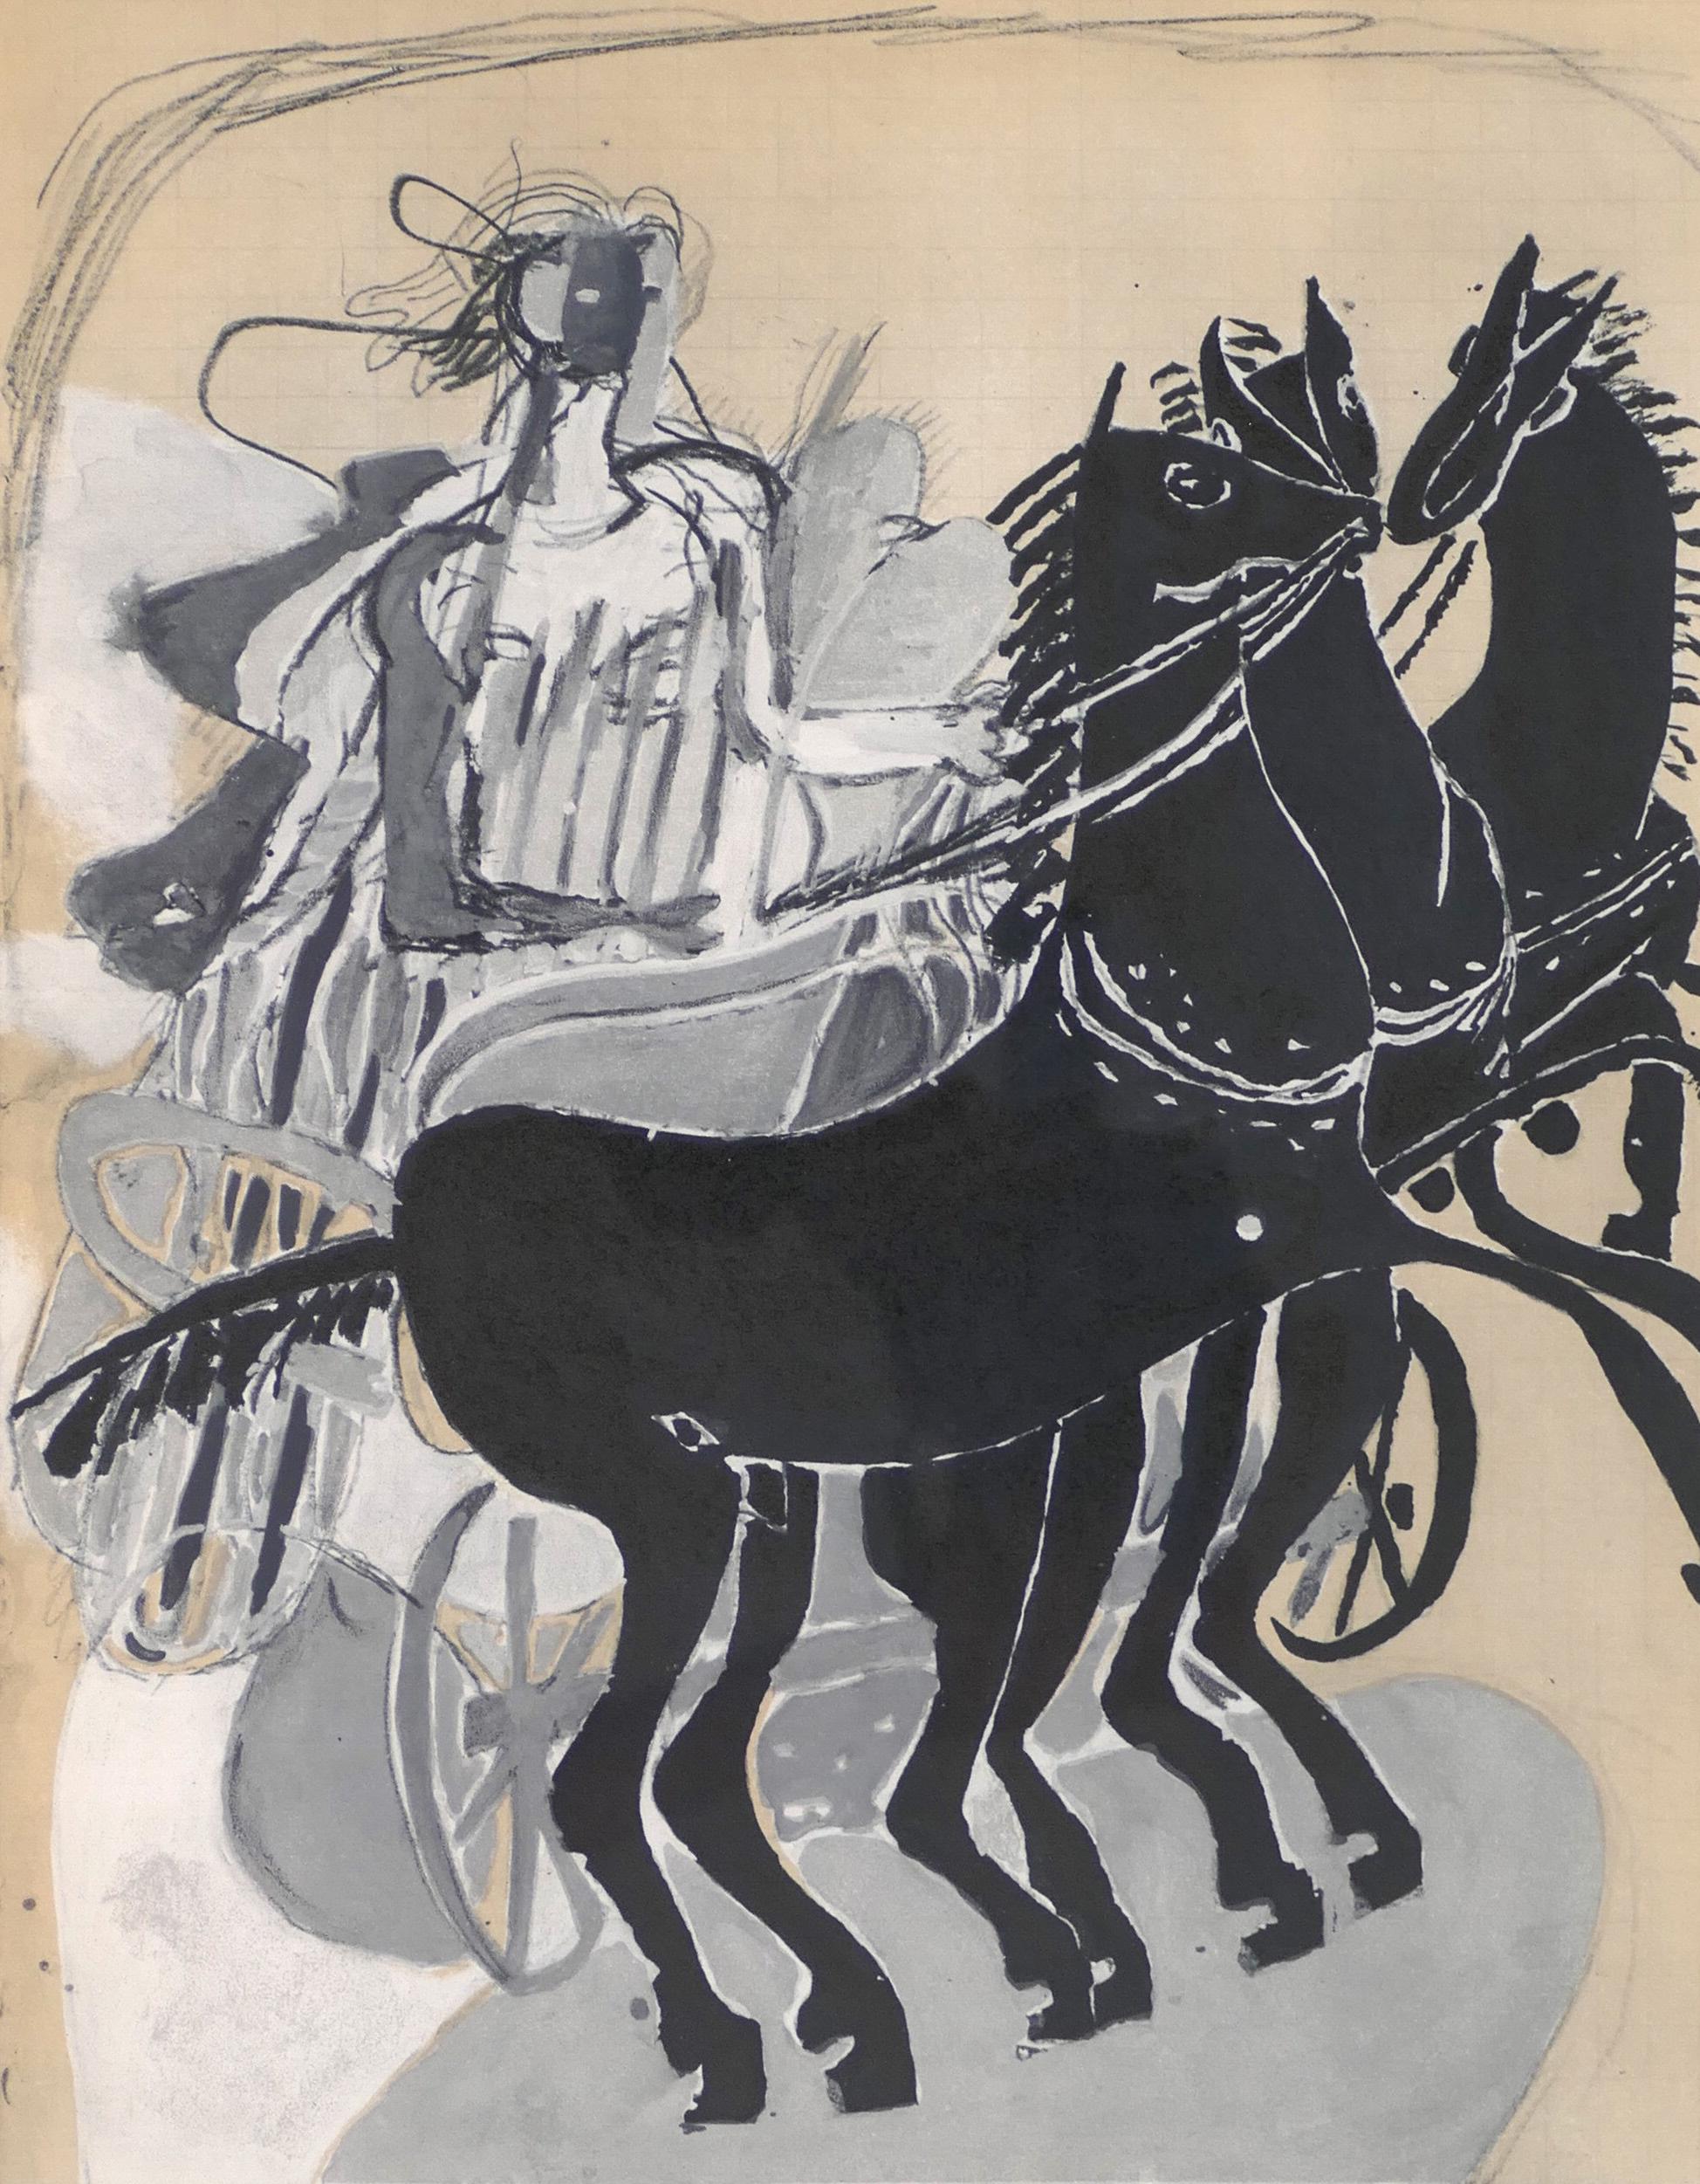 The Chariot is an original lithograph realized by the great Fauvist and father of Cubism Georges Braque (1882-1963) in 1955.

Passepartout including: cm 47,5 x 41. Image dimension: cm 32 x 23,5. Very good conditions.

Lithograph after a watercolour